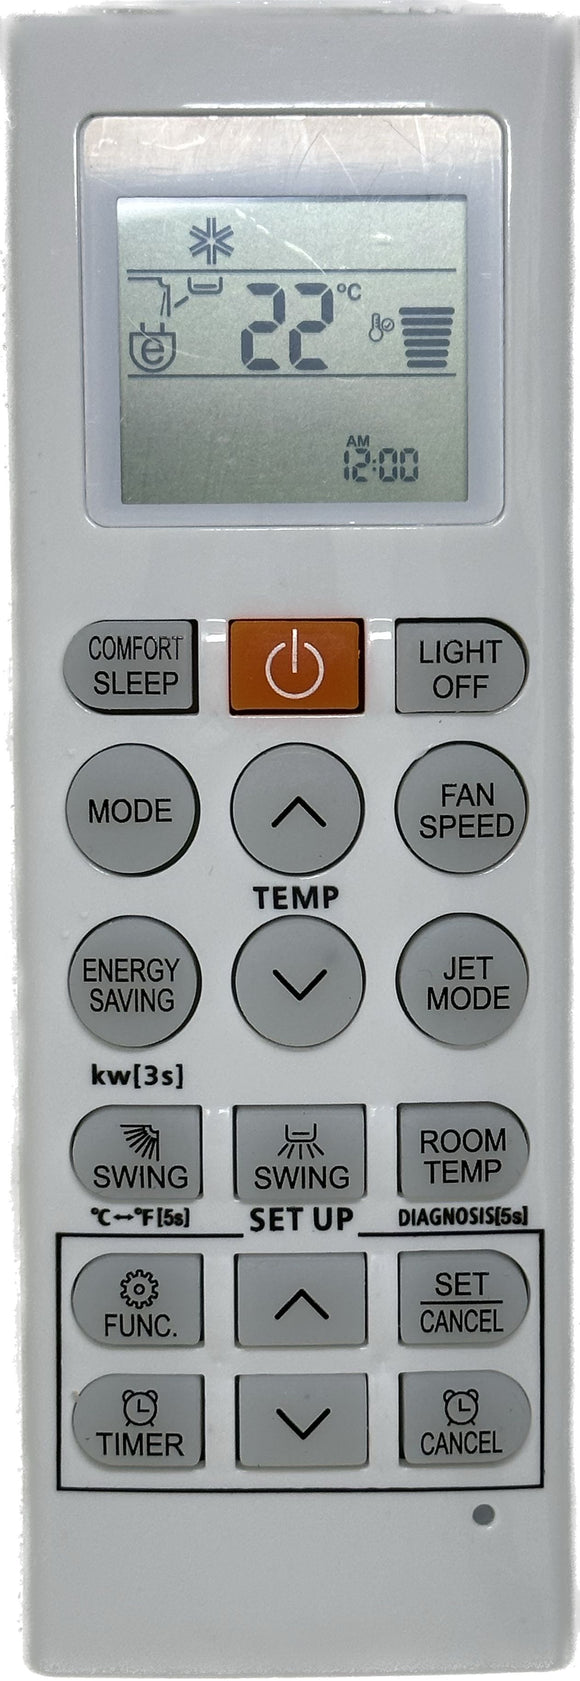 Replacement LG Air Conditioner Remote Control - AKB73855717